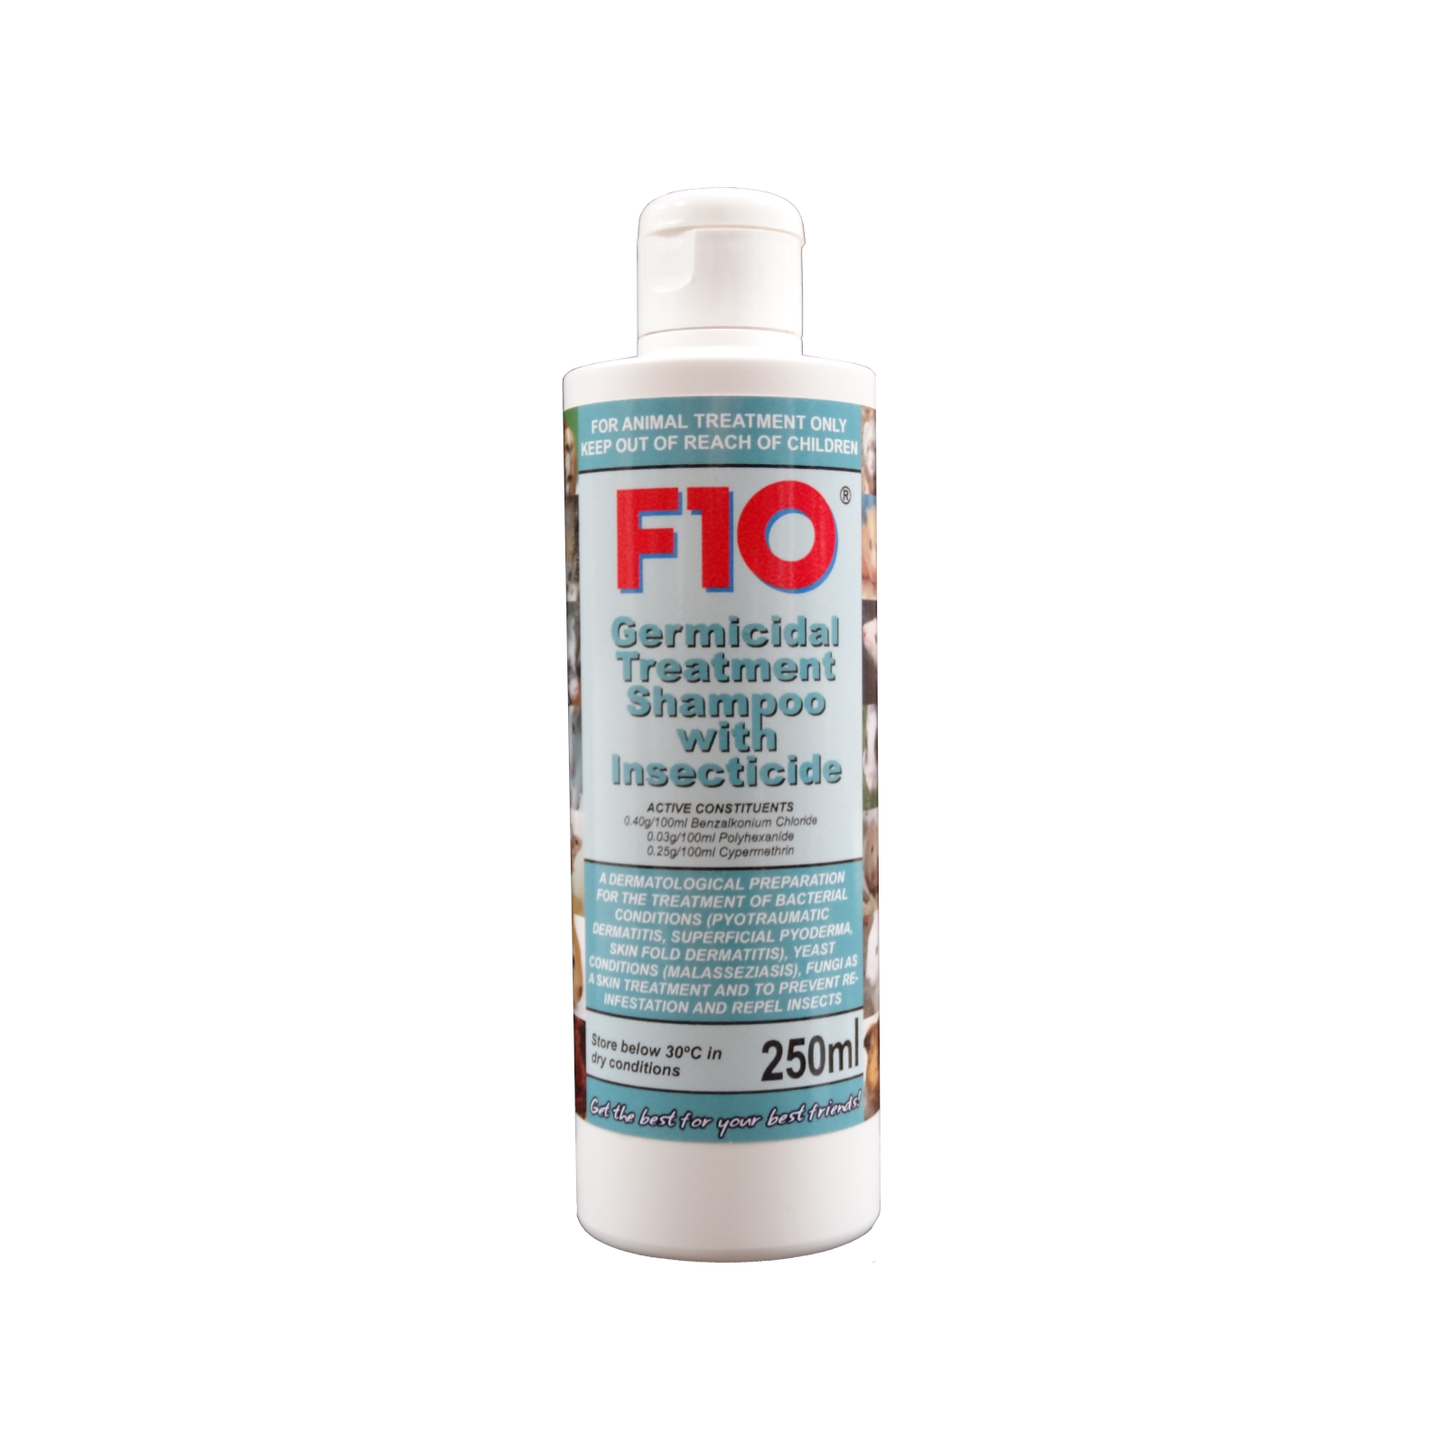 A bottle of F10 Germicidal Treatment Shampoo with Insecticide